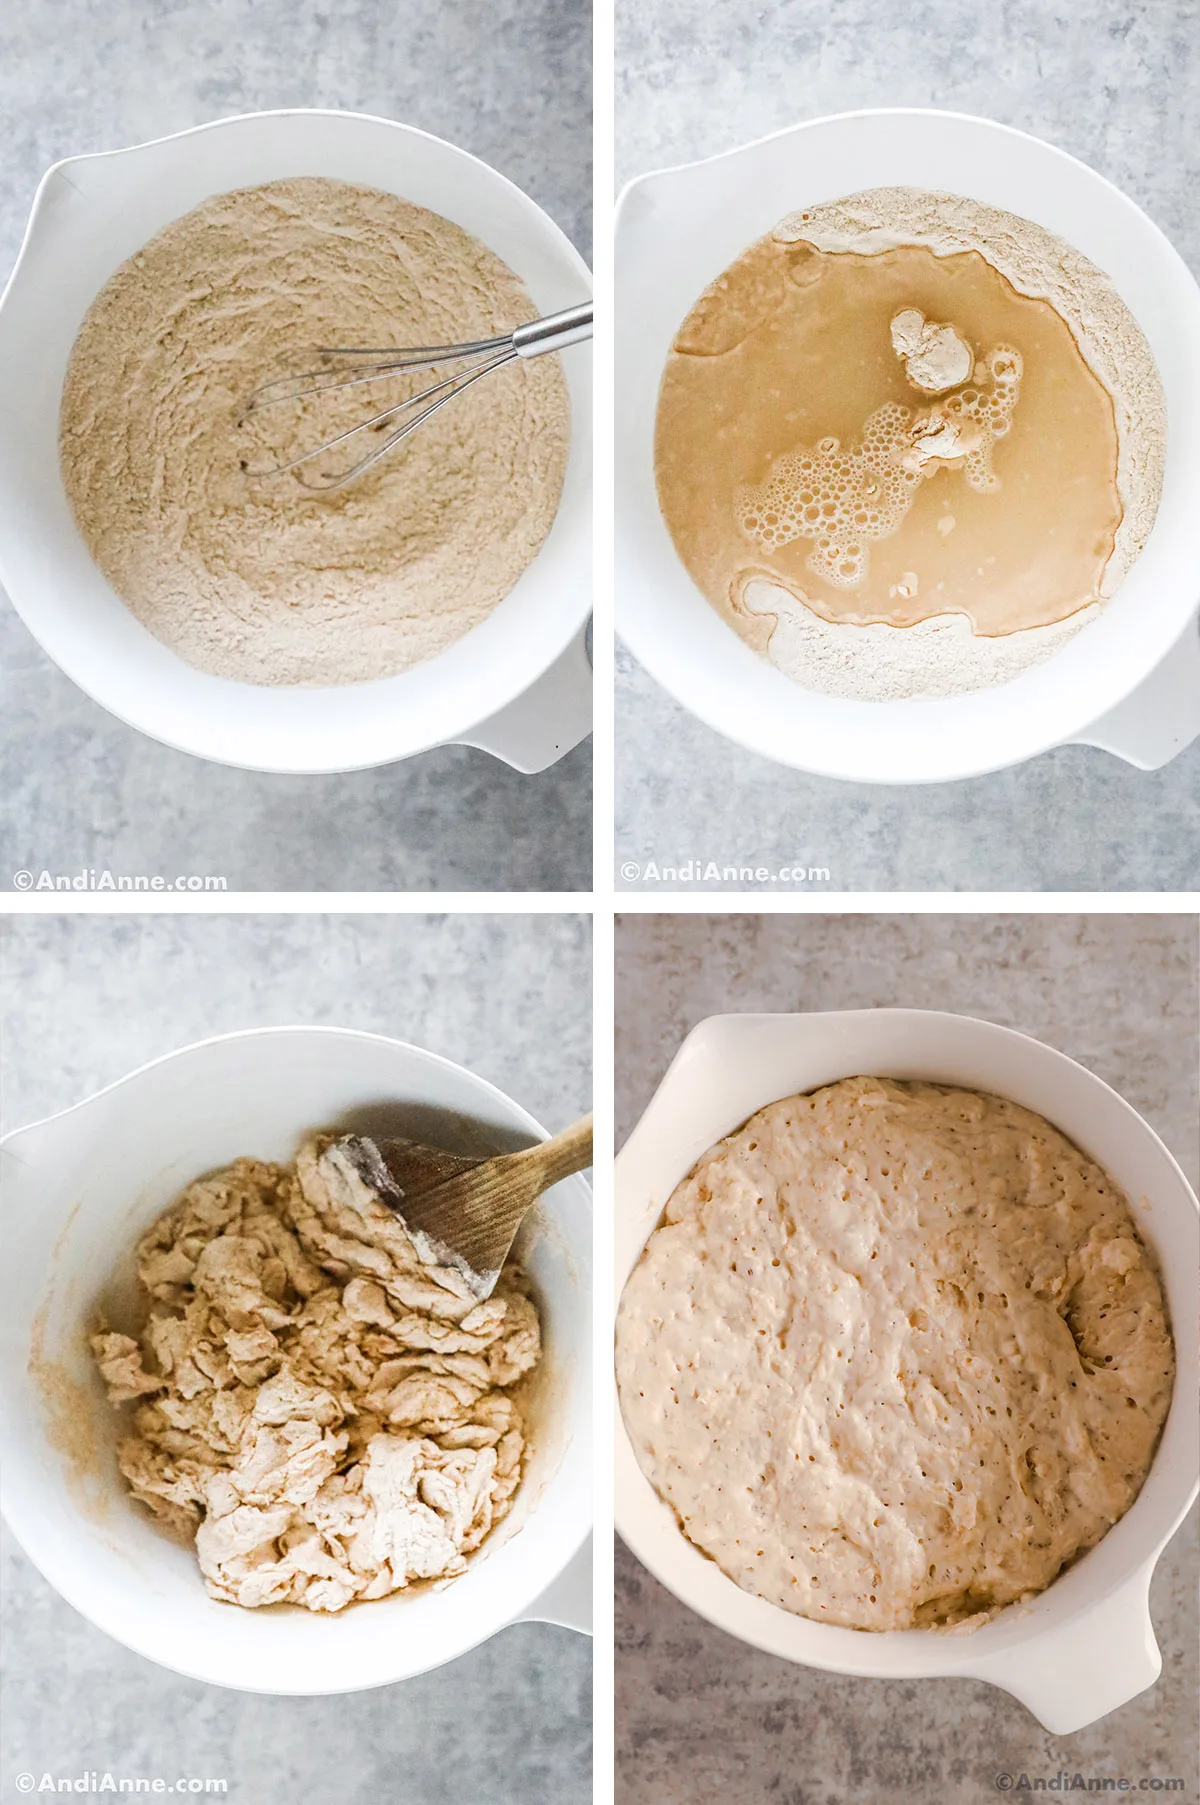 Images of a white bowl with bread dough ingredients in various stages.